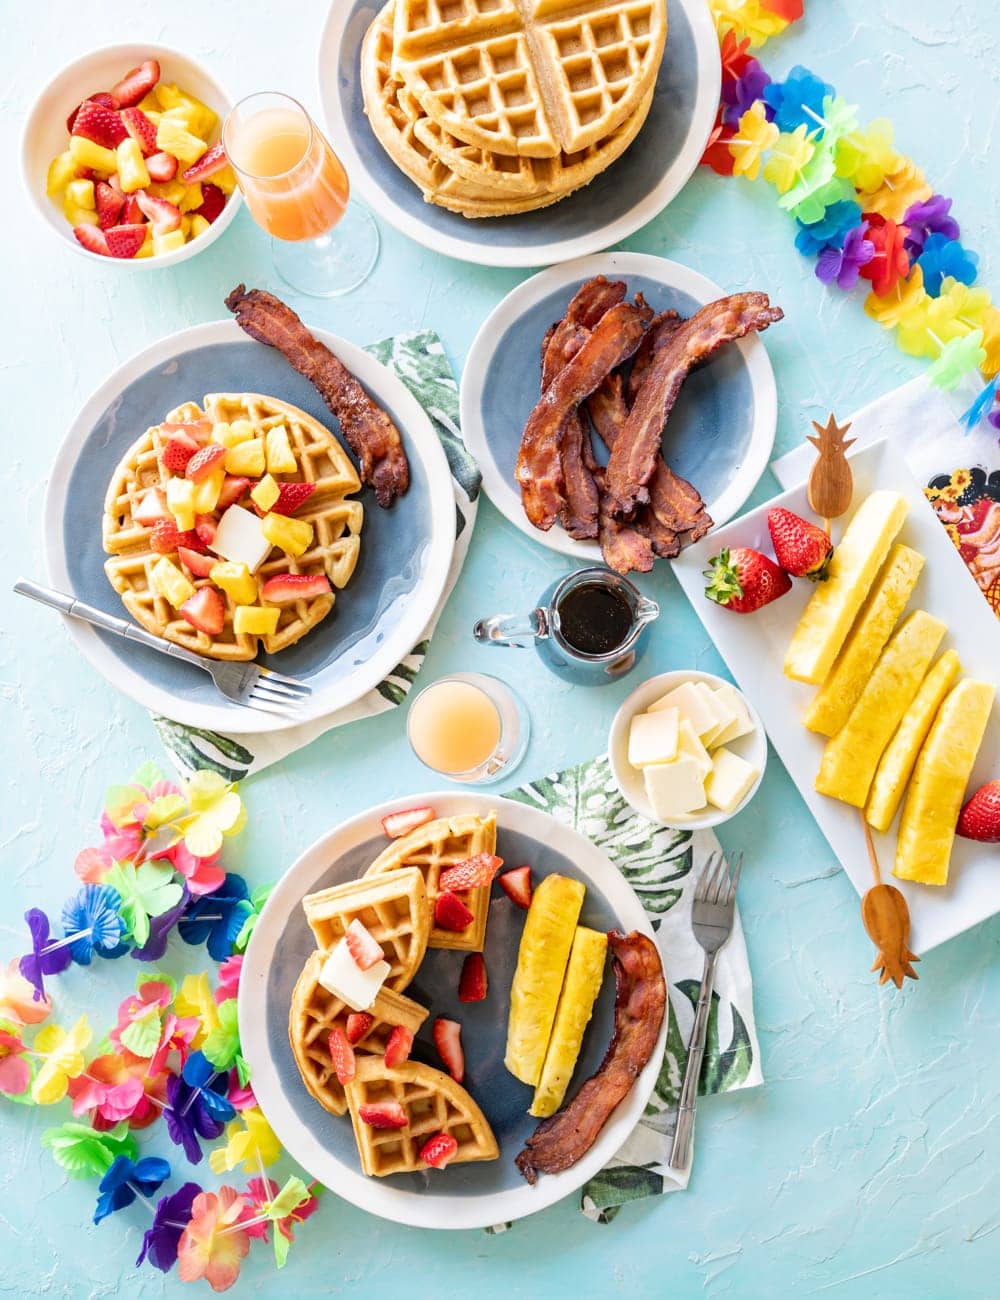 coconut mochi waffles on blue plates with pineapple spears, pieces of cooked bacon, glass with mimosa cocktail in it, glass syrup bottle, rainbow Hawaiian lei on table